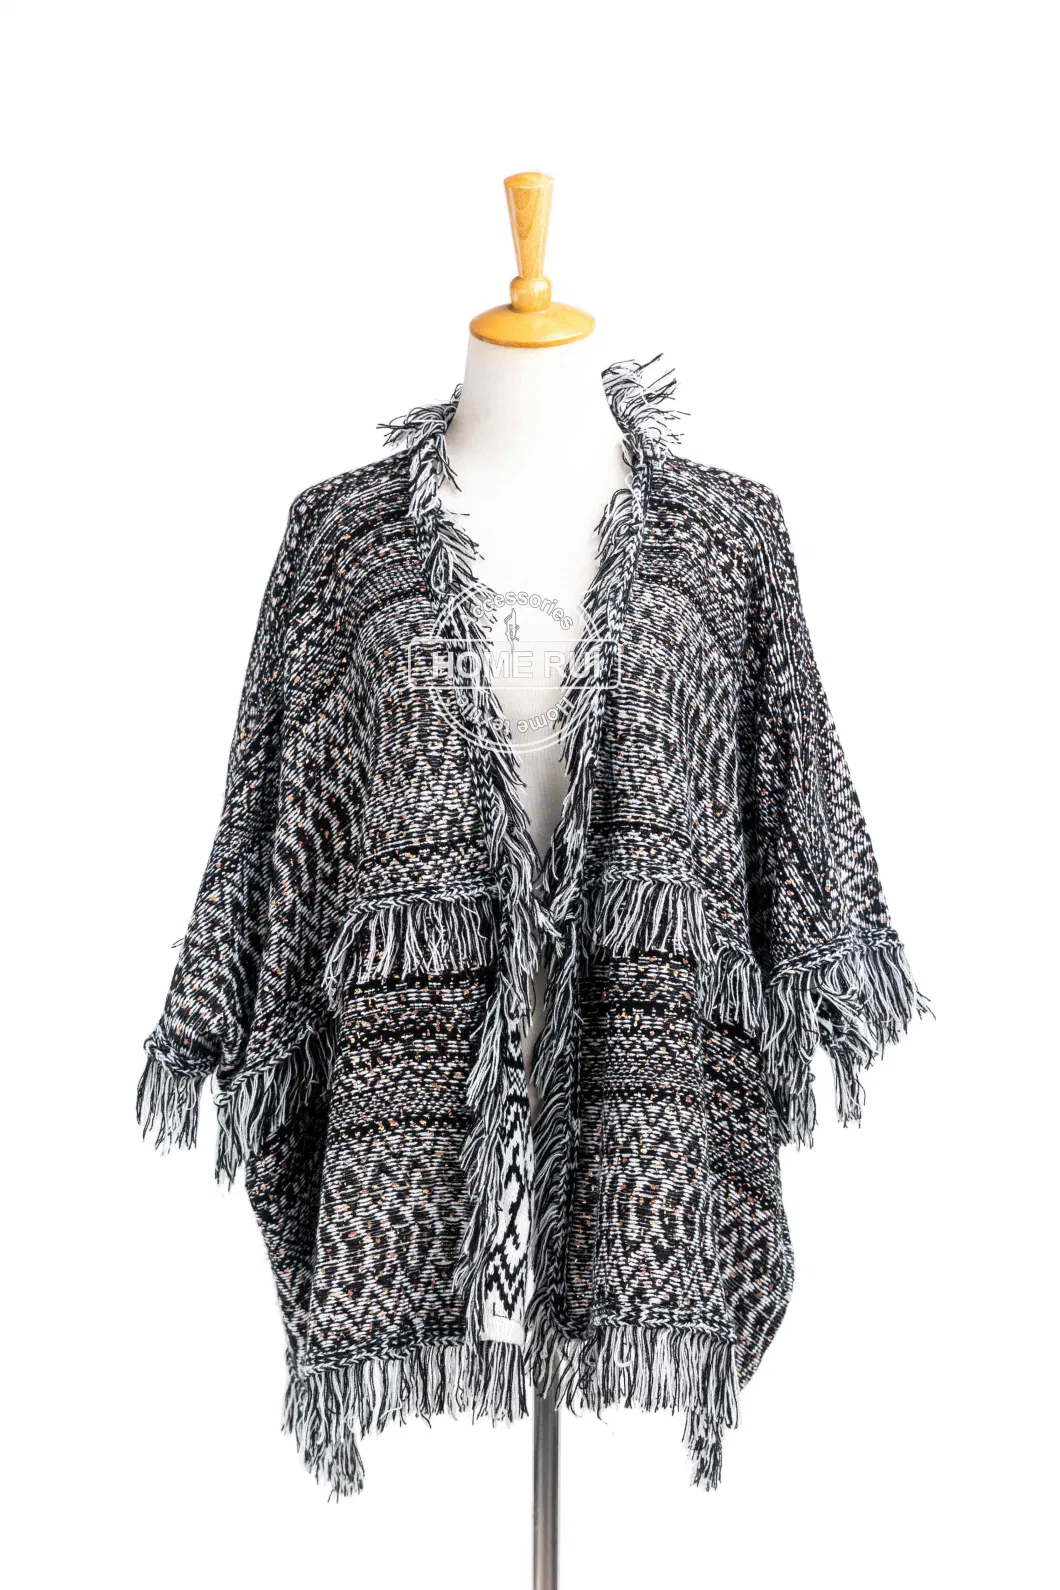 Home Rui Maufacturer Outerwear Spring Autumn Woman Warmth Apparel Accessory Fashion Rhombus Knitted Black Mixed Oversize Wraps Fringe Shawl Cardigan Cloak Cape